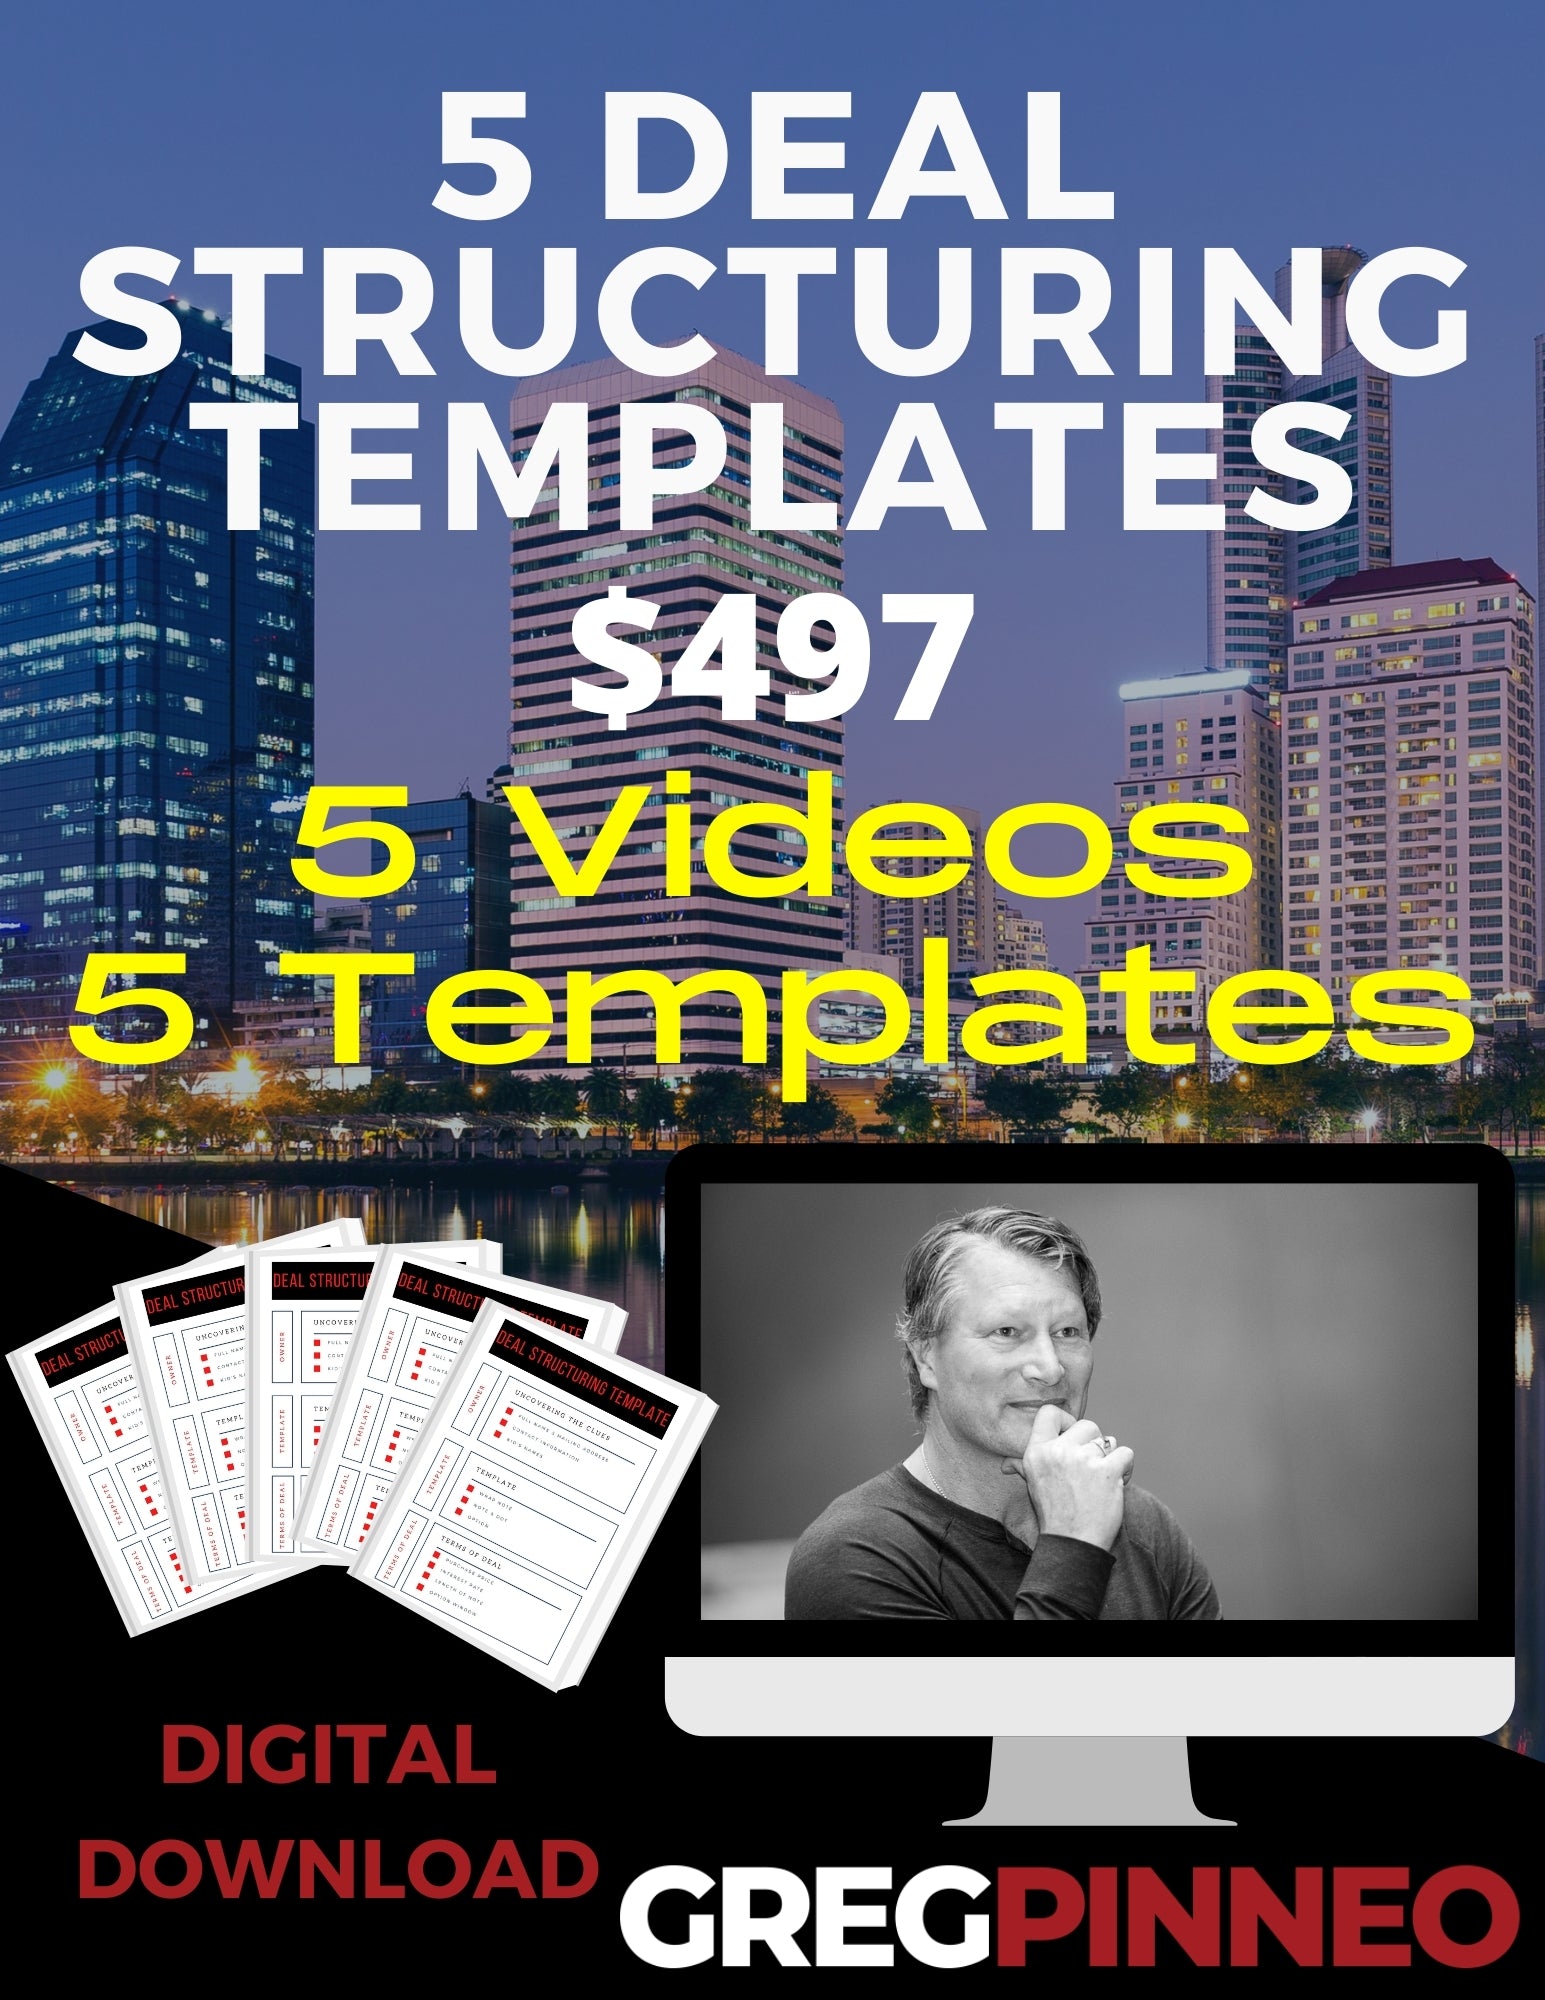 Pinneo's Top 5 Deal Structuring Templates